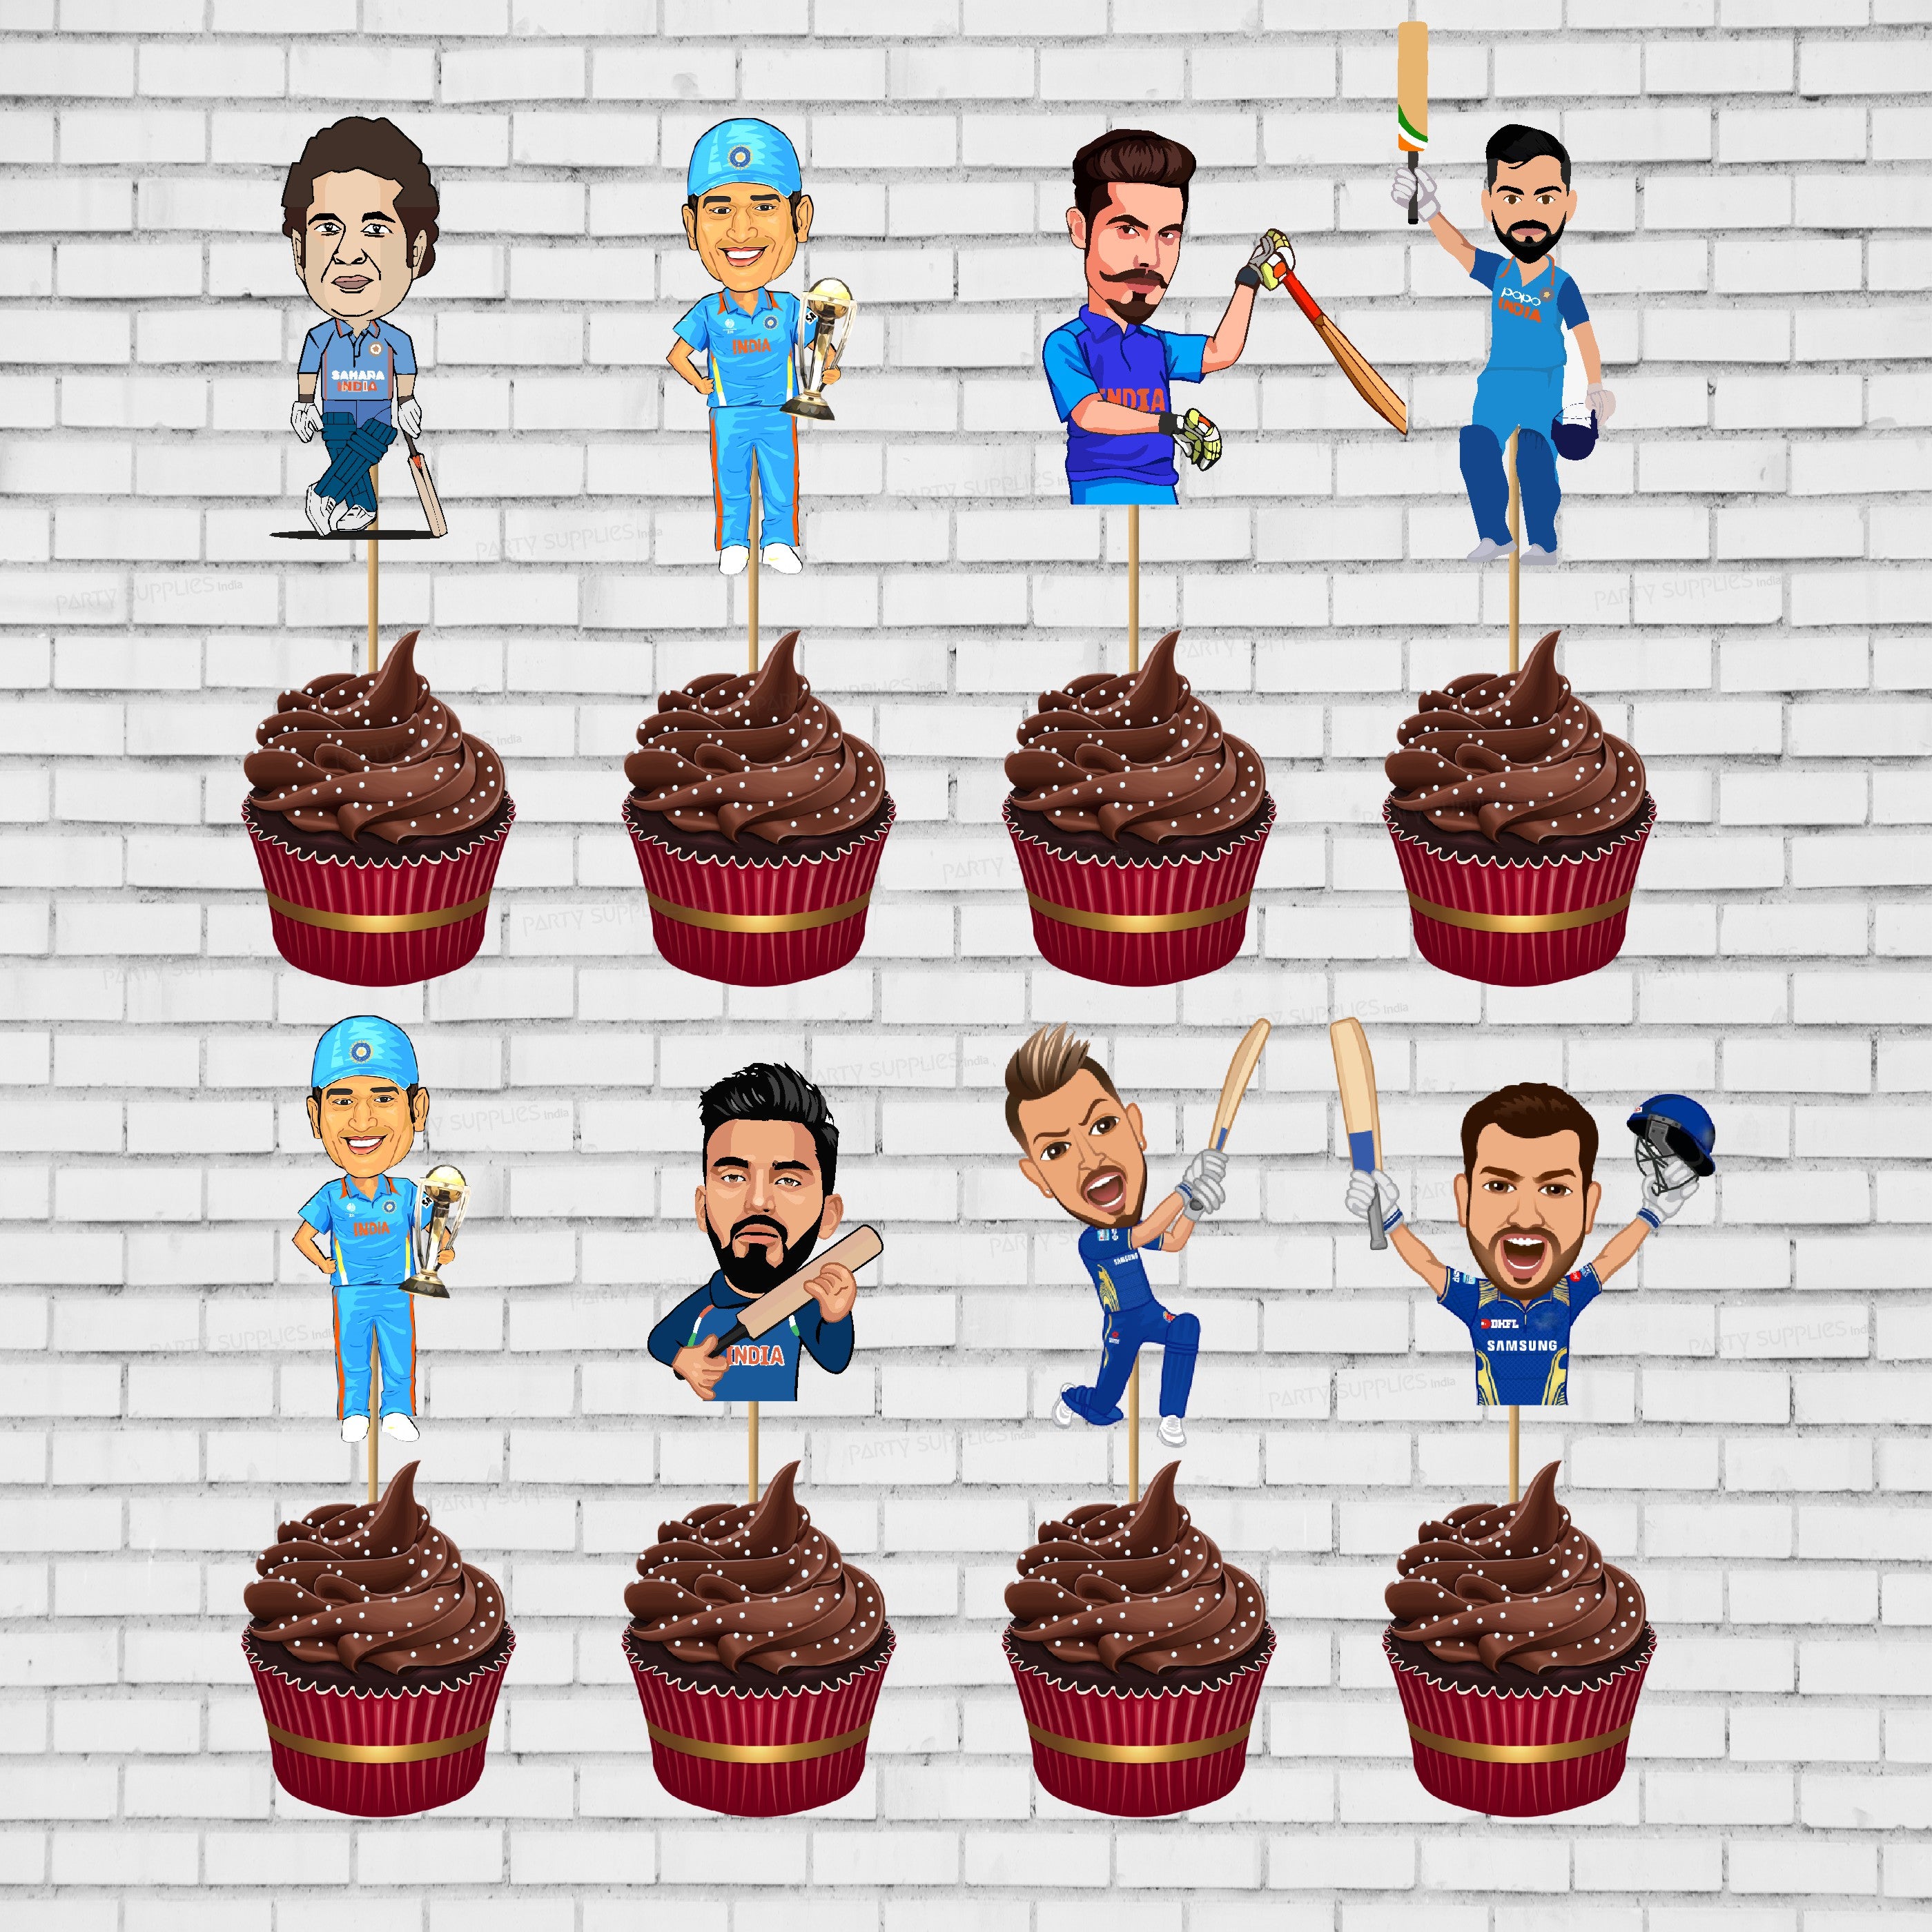 PSI Cricket Theme Players Cup Cake Topper